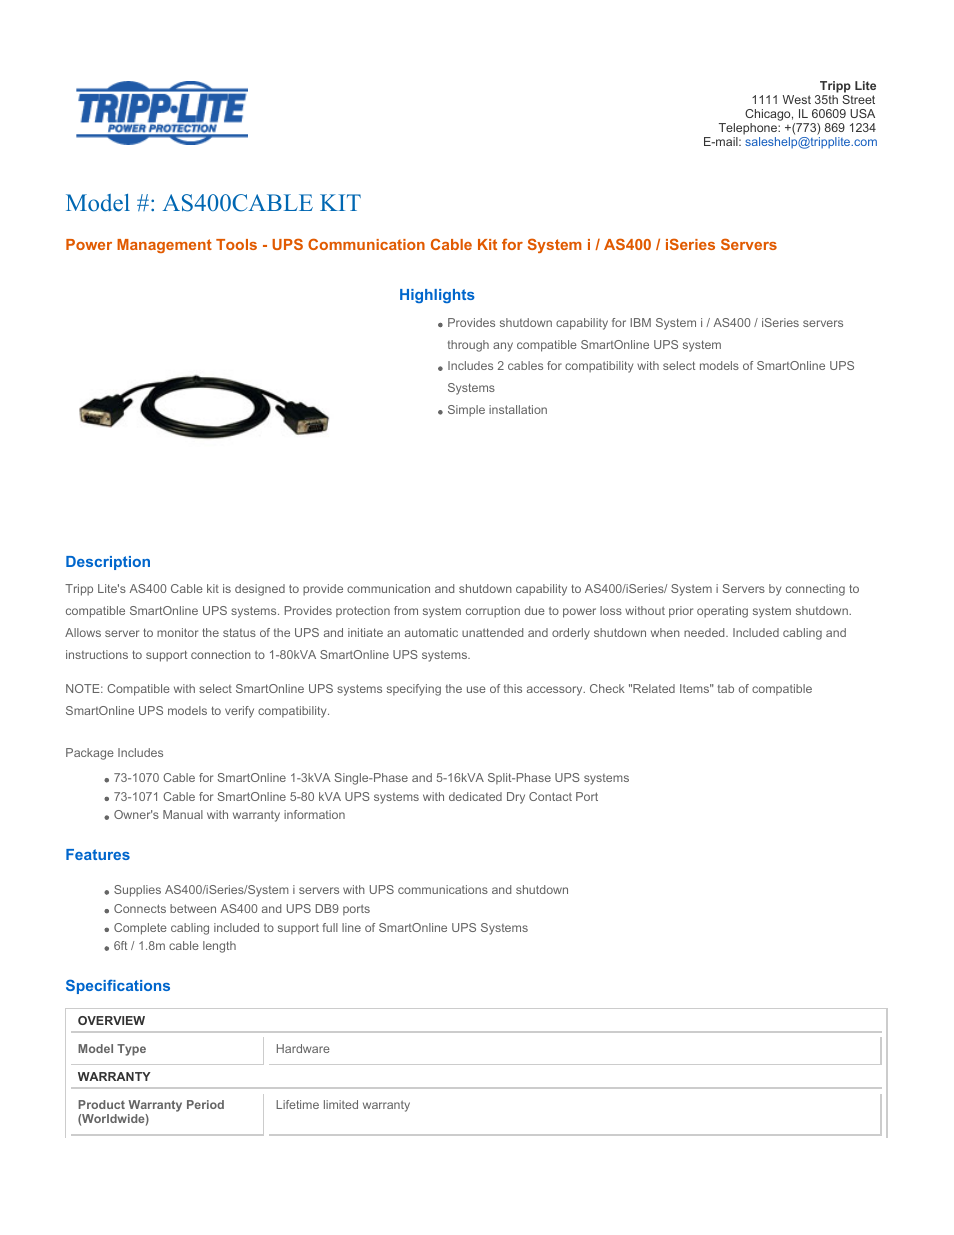 AS400CABLE KIT